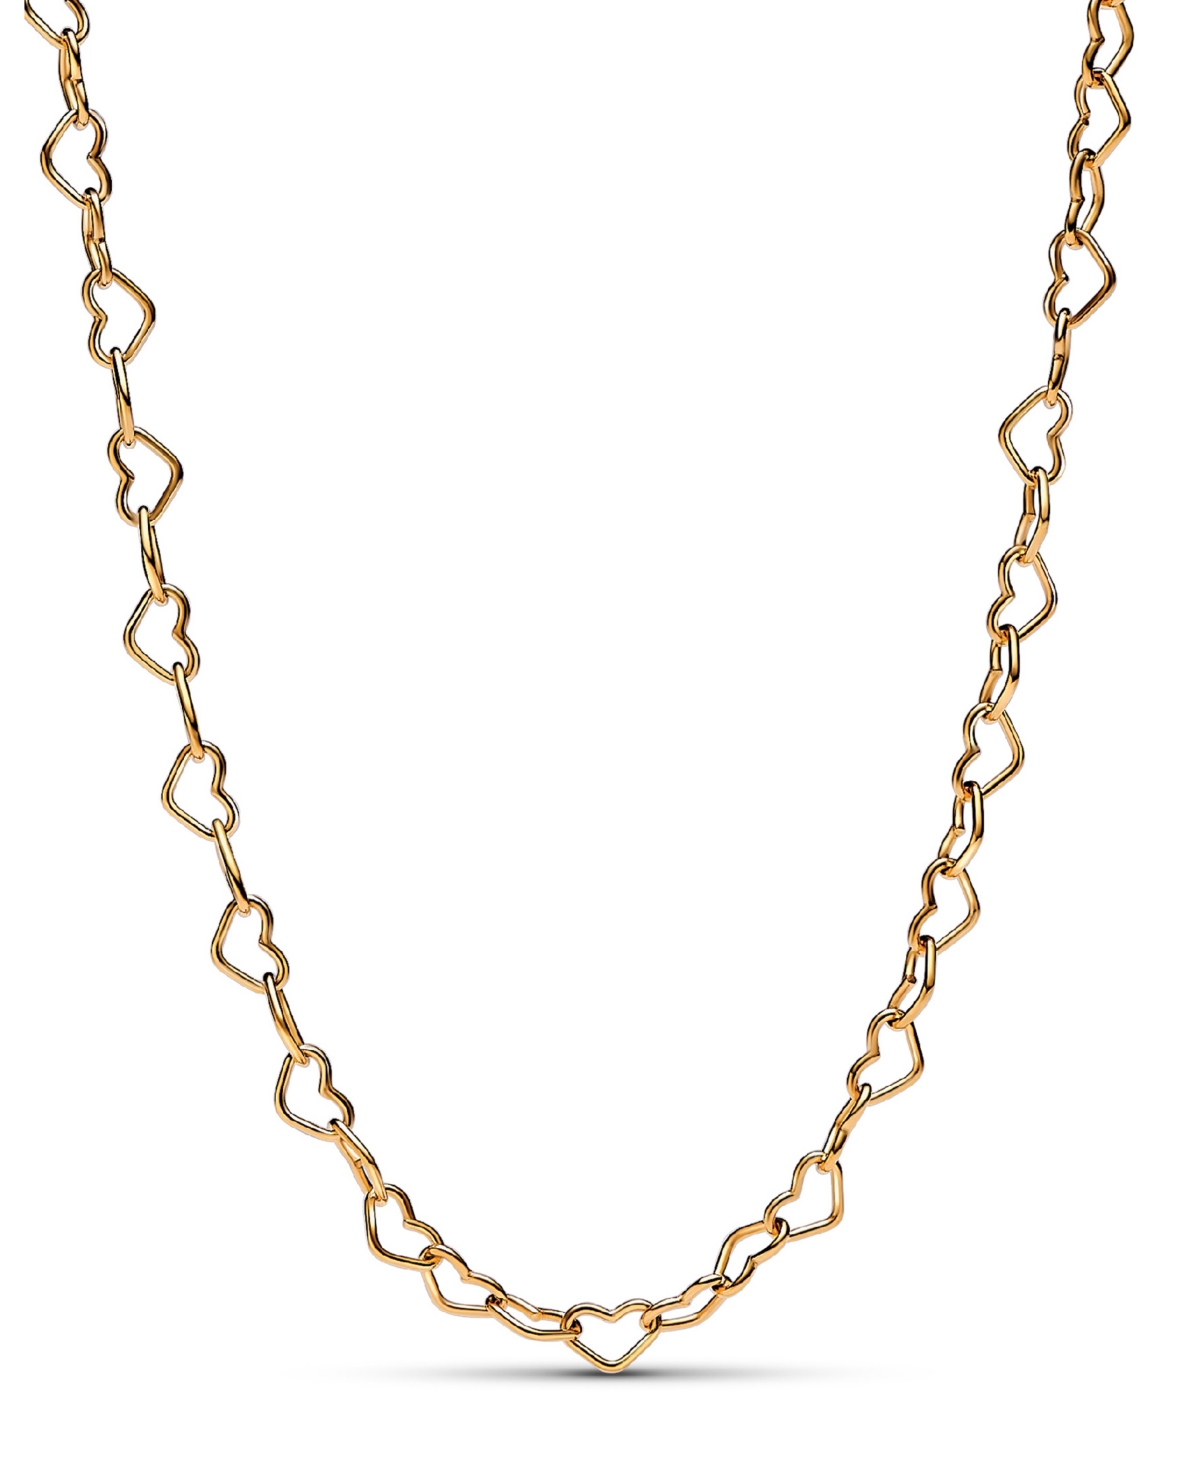 in 14k Gold-plated Hearts Collier 17.7 inch Necklace - Gold